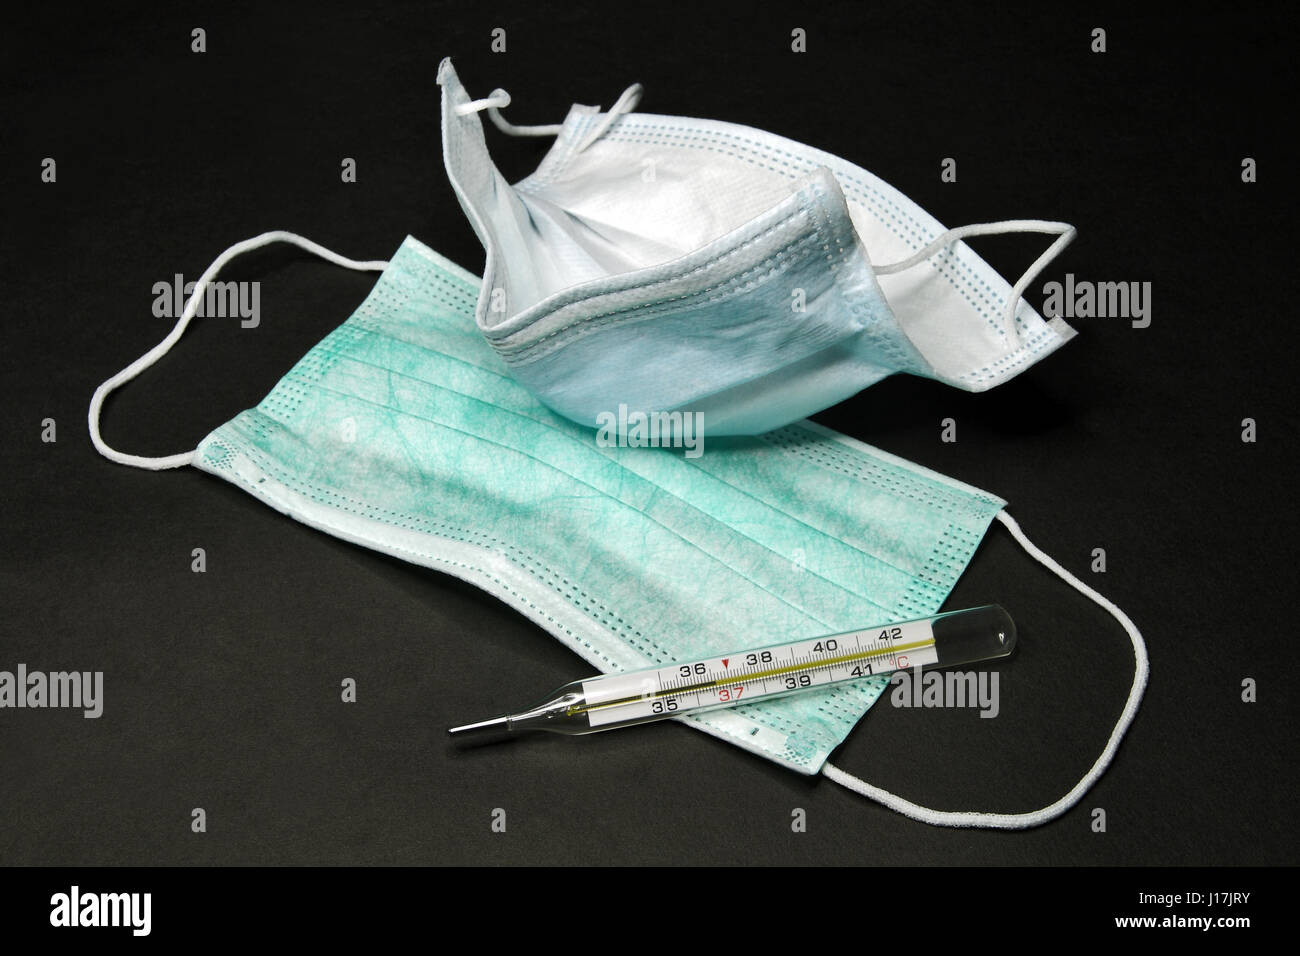 Disposable medical masks and mercury thermometer (testimony of 36.6 C) Stock Photo